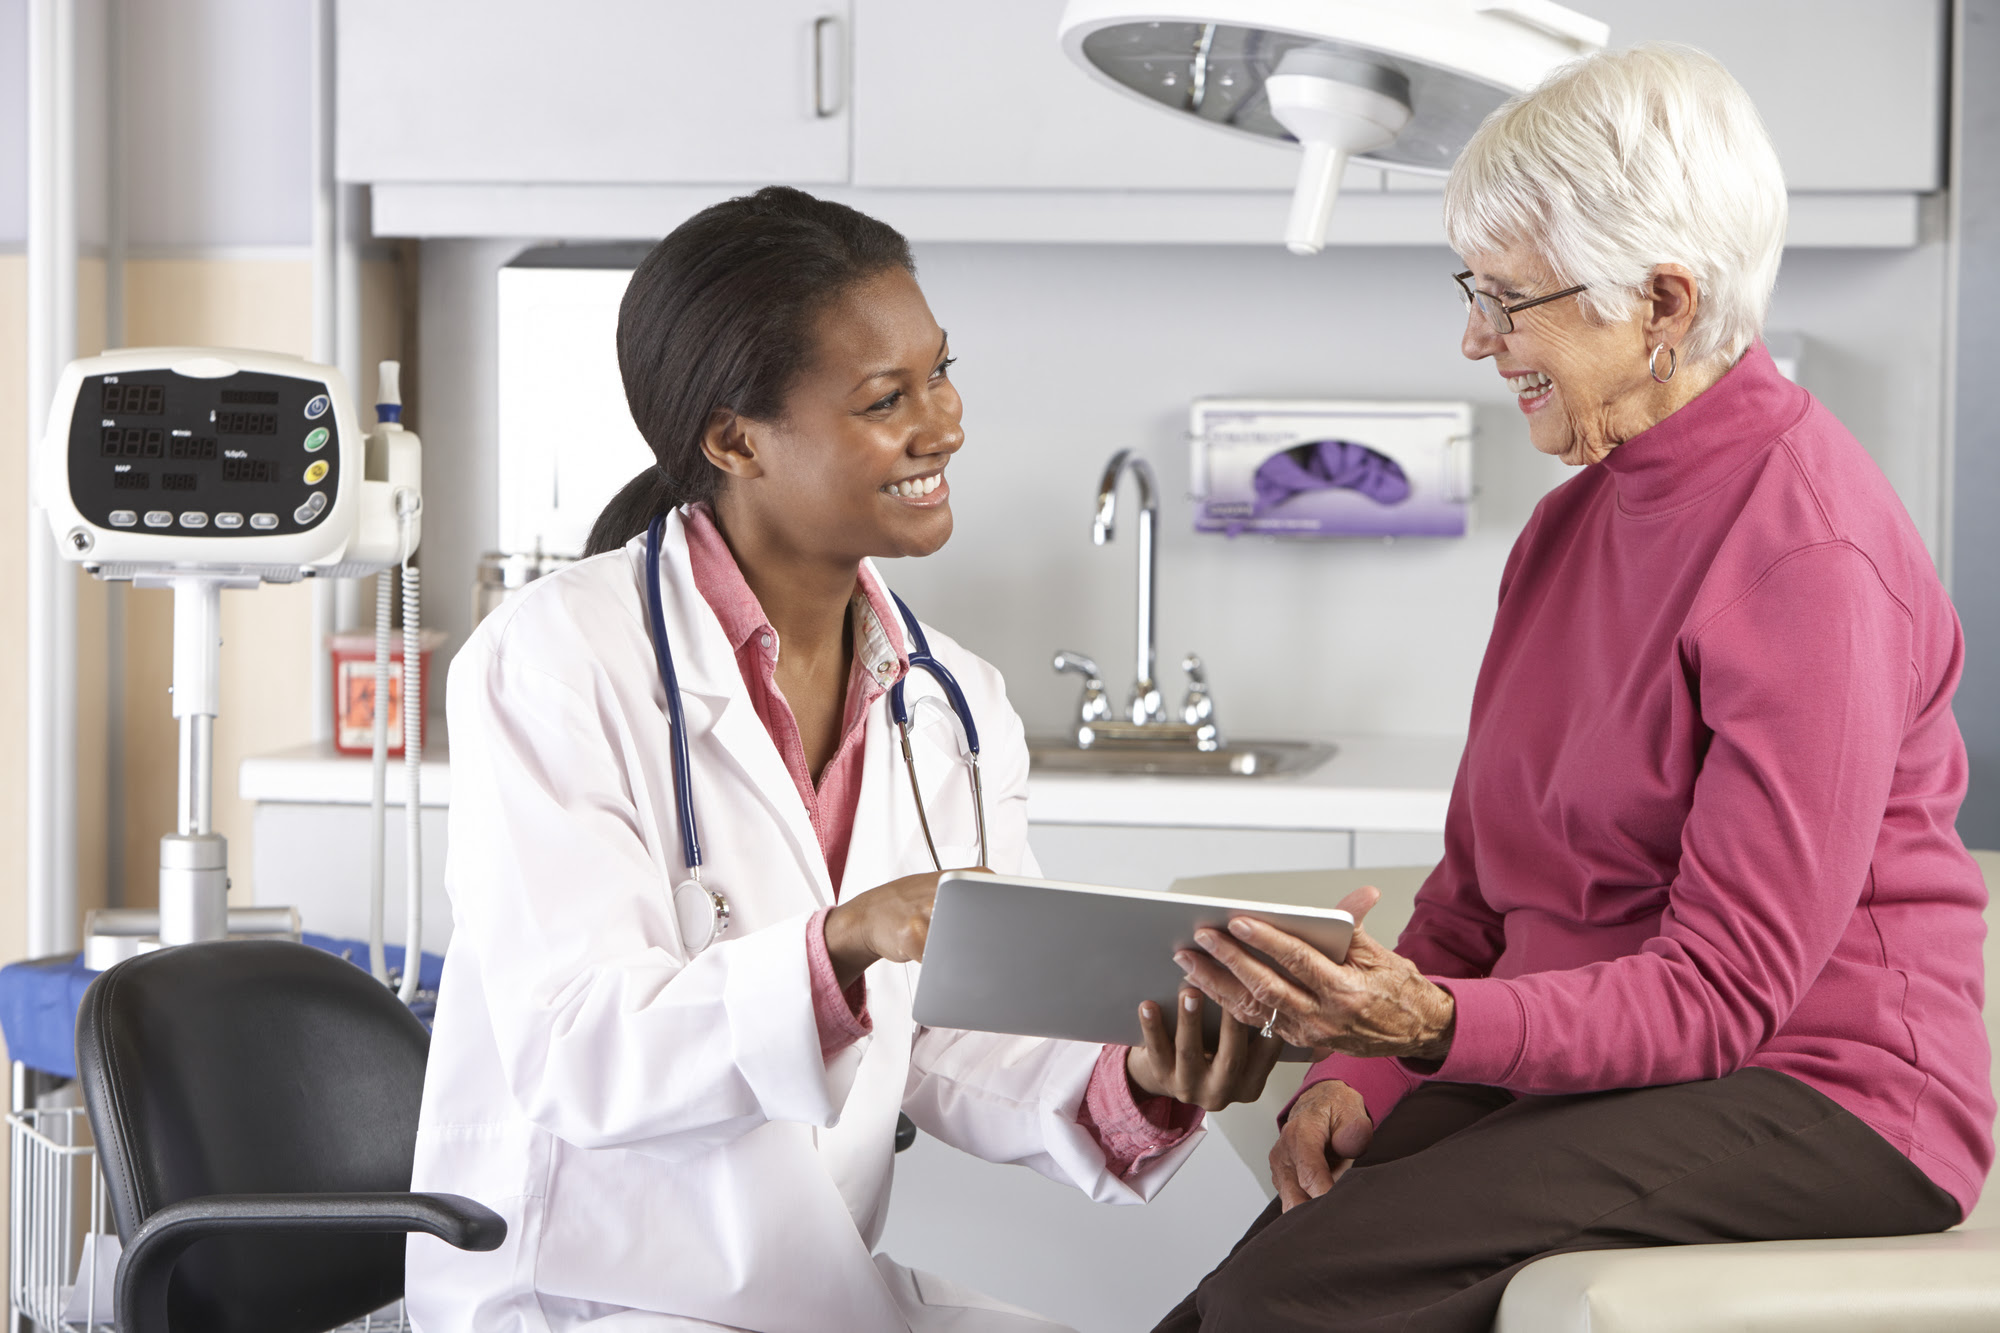 Guide to Improving Patient Safety in Primary Care Settings by Engaging Patients